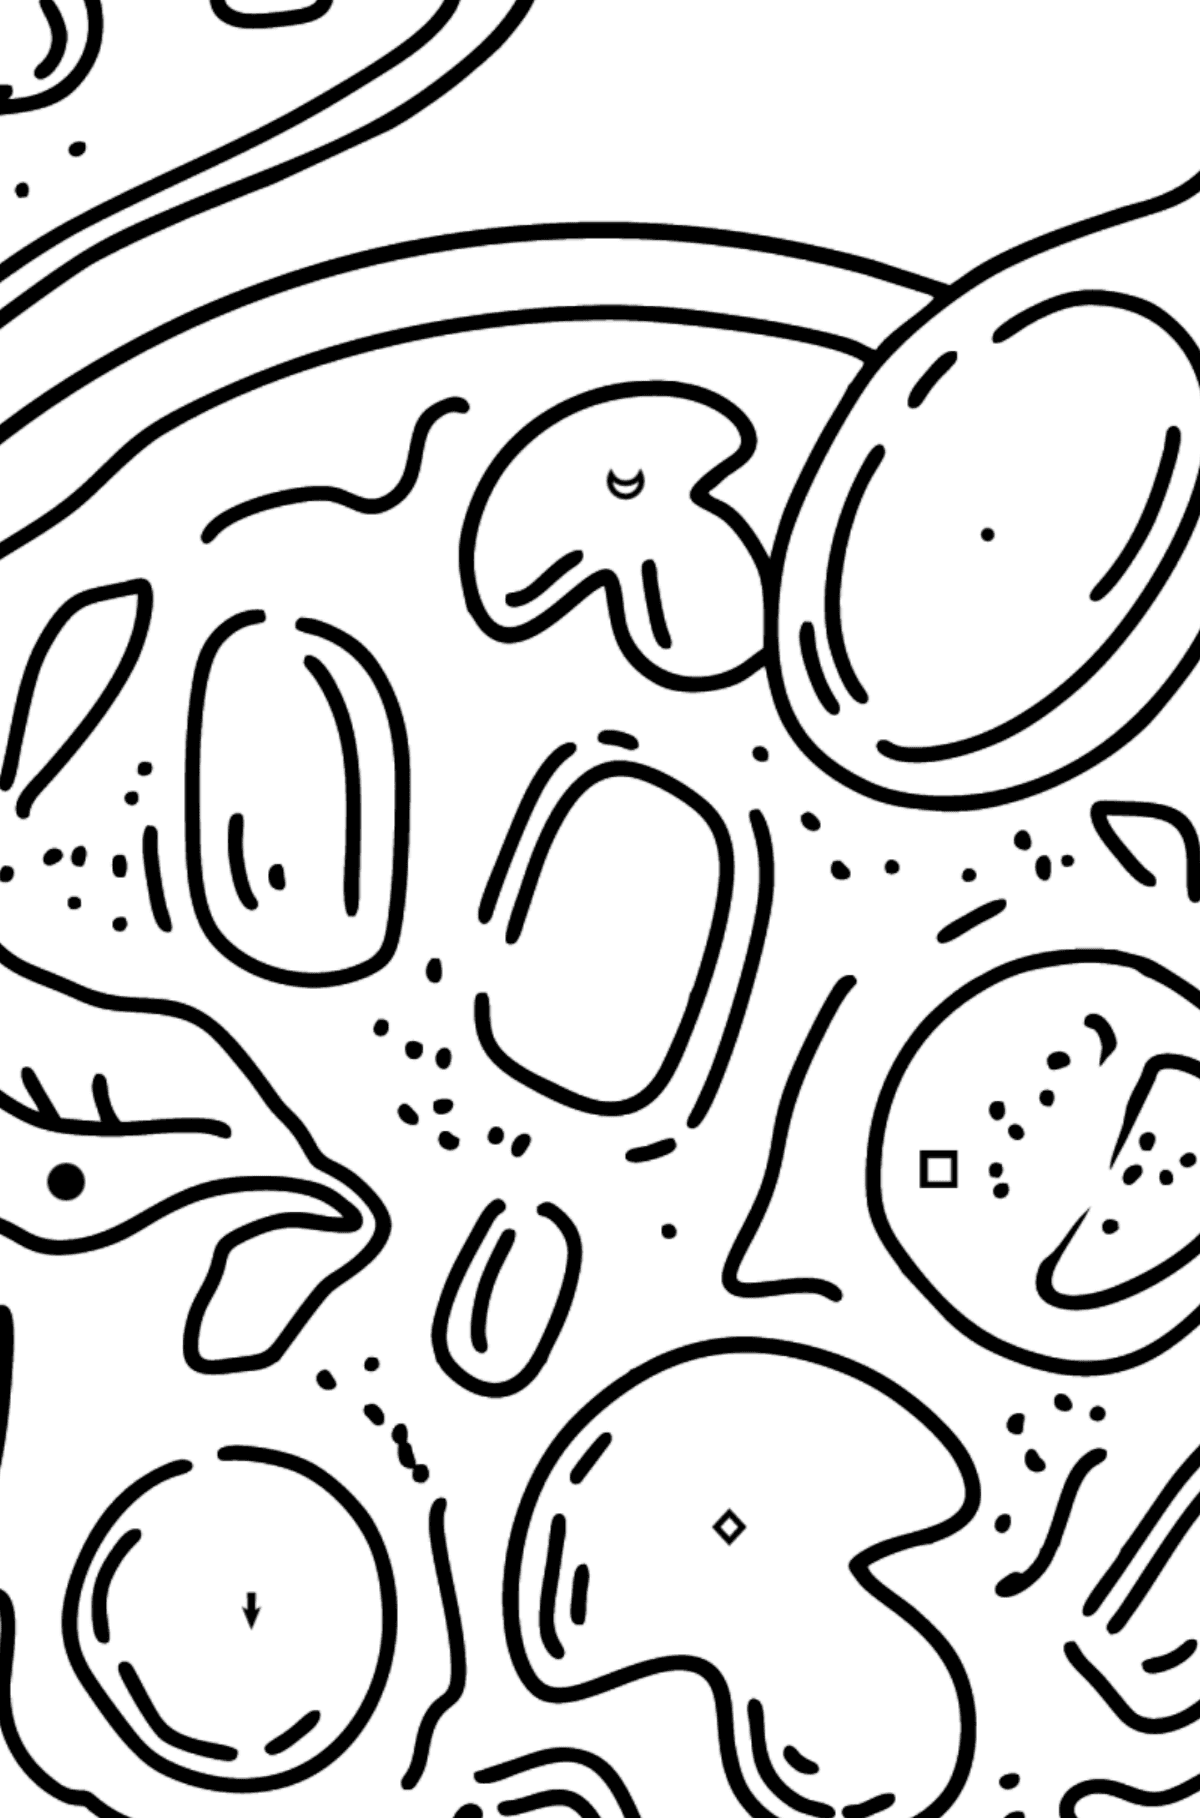 Lunch coloring page - soup - Coloring by Symbols and Geometric Shapes for Kids